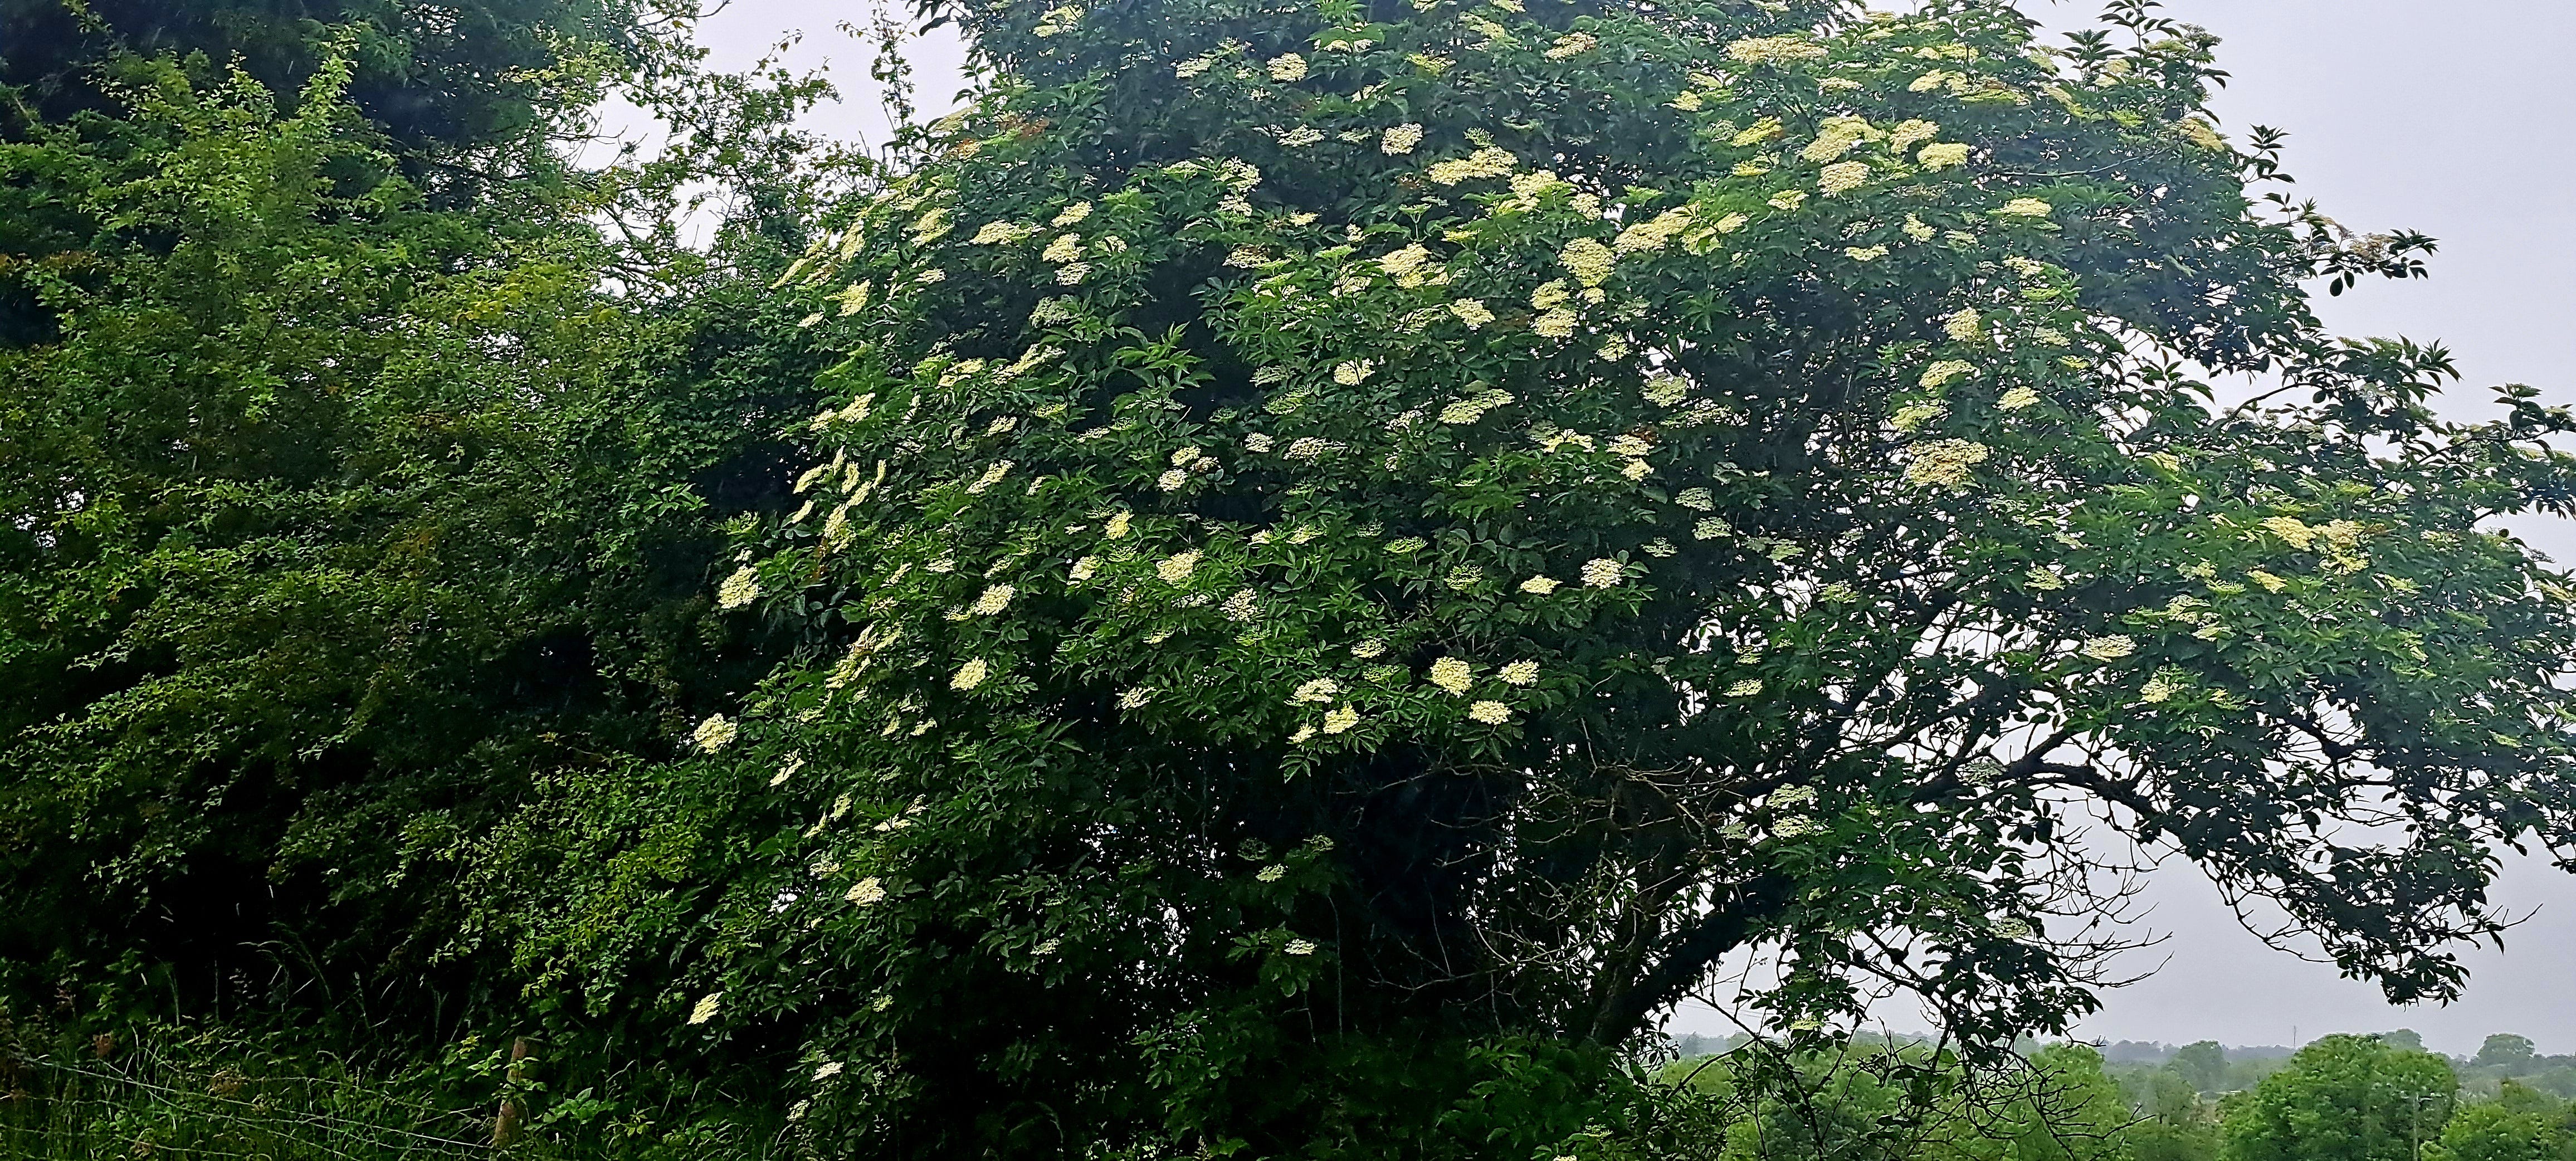 Image is dominated by a large tree, full of clusters of creamy-white blossom.